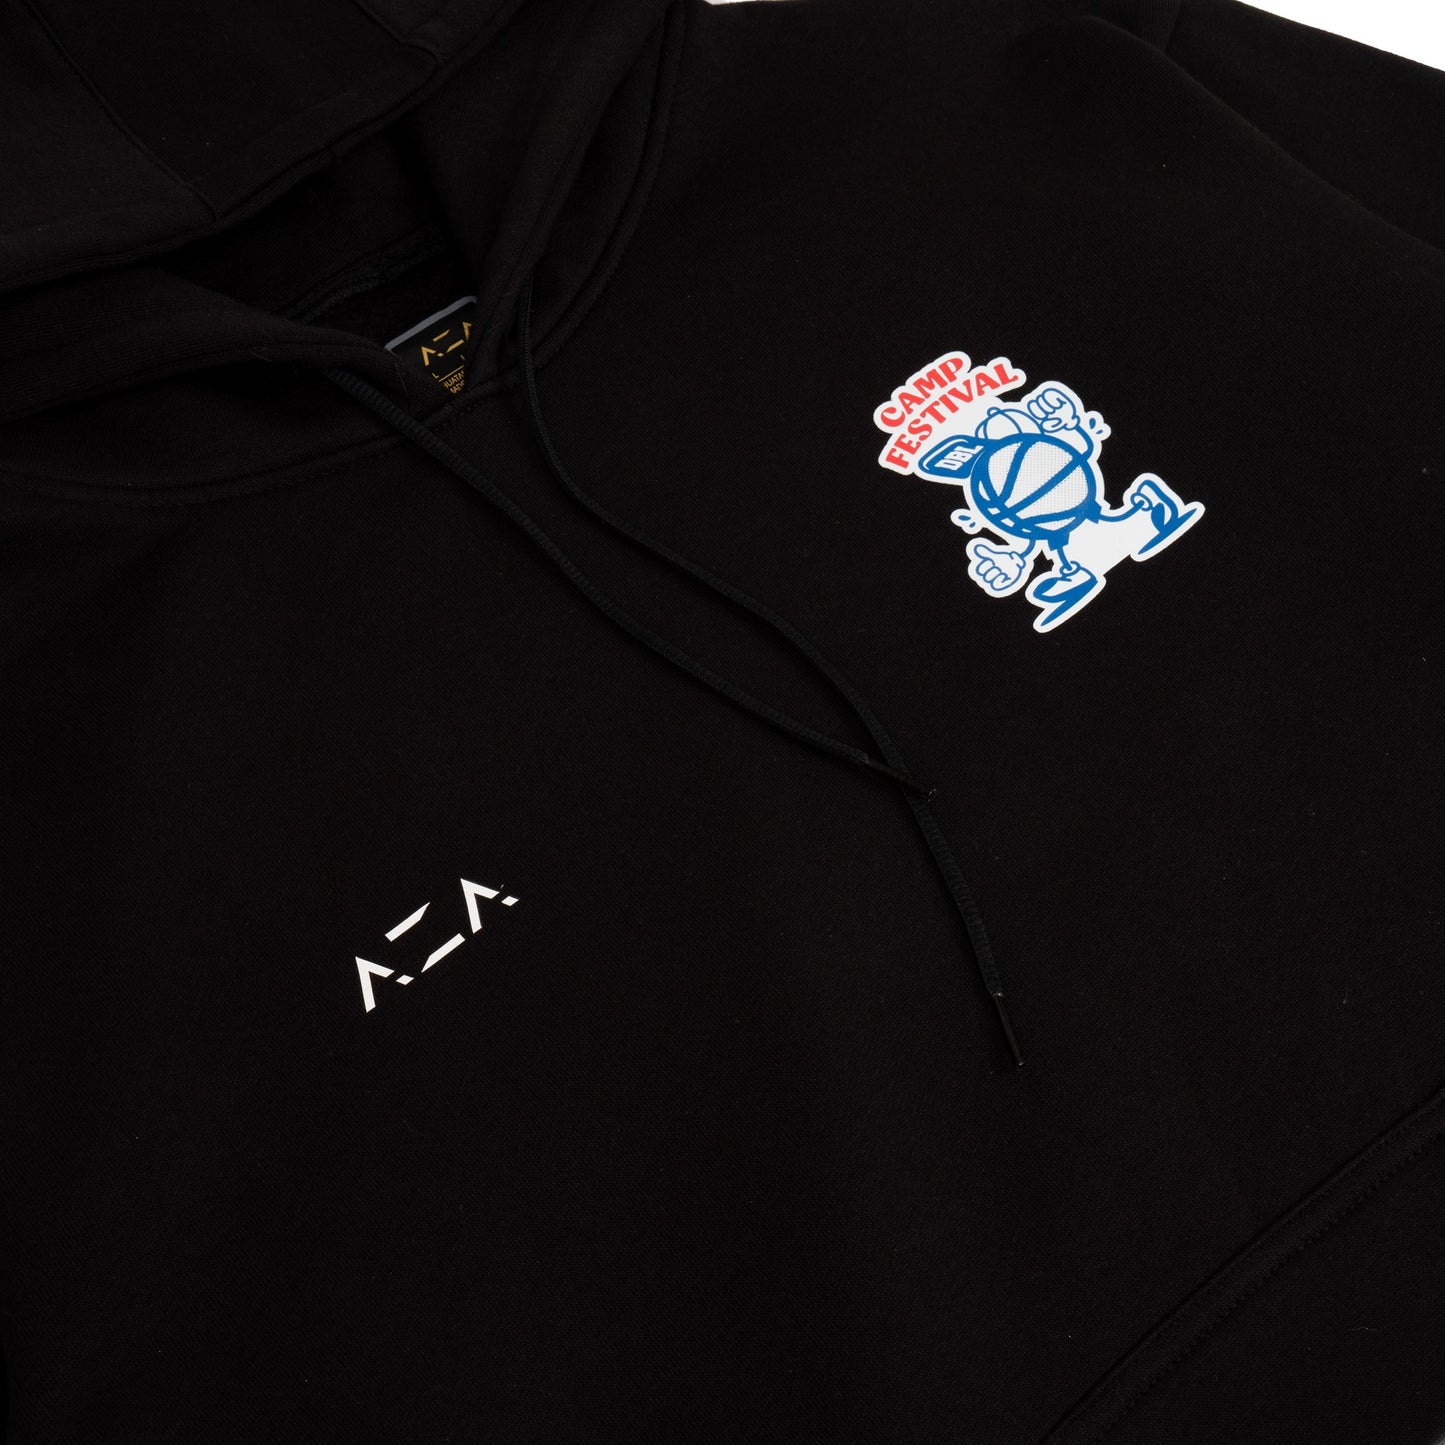 AZA x DBL Camp 24 Series Hoodie Doodle Basketball - Black